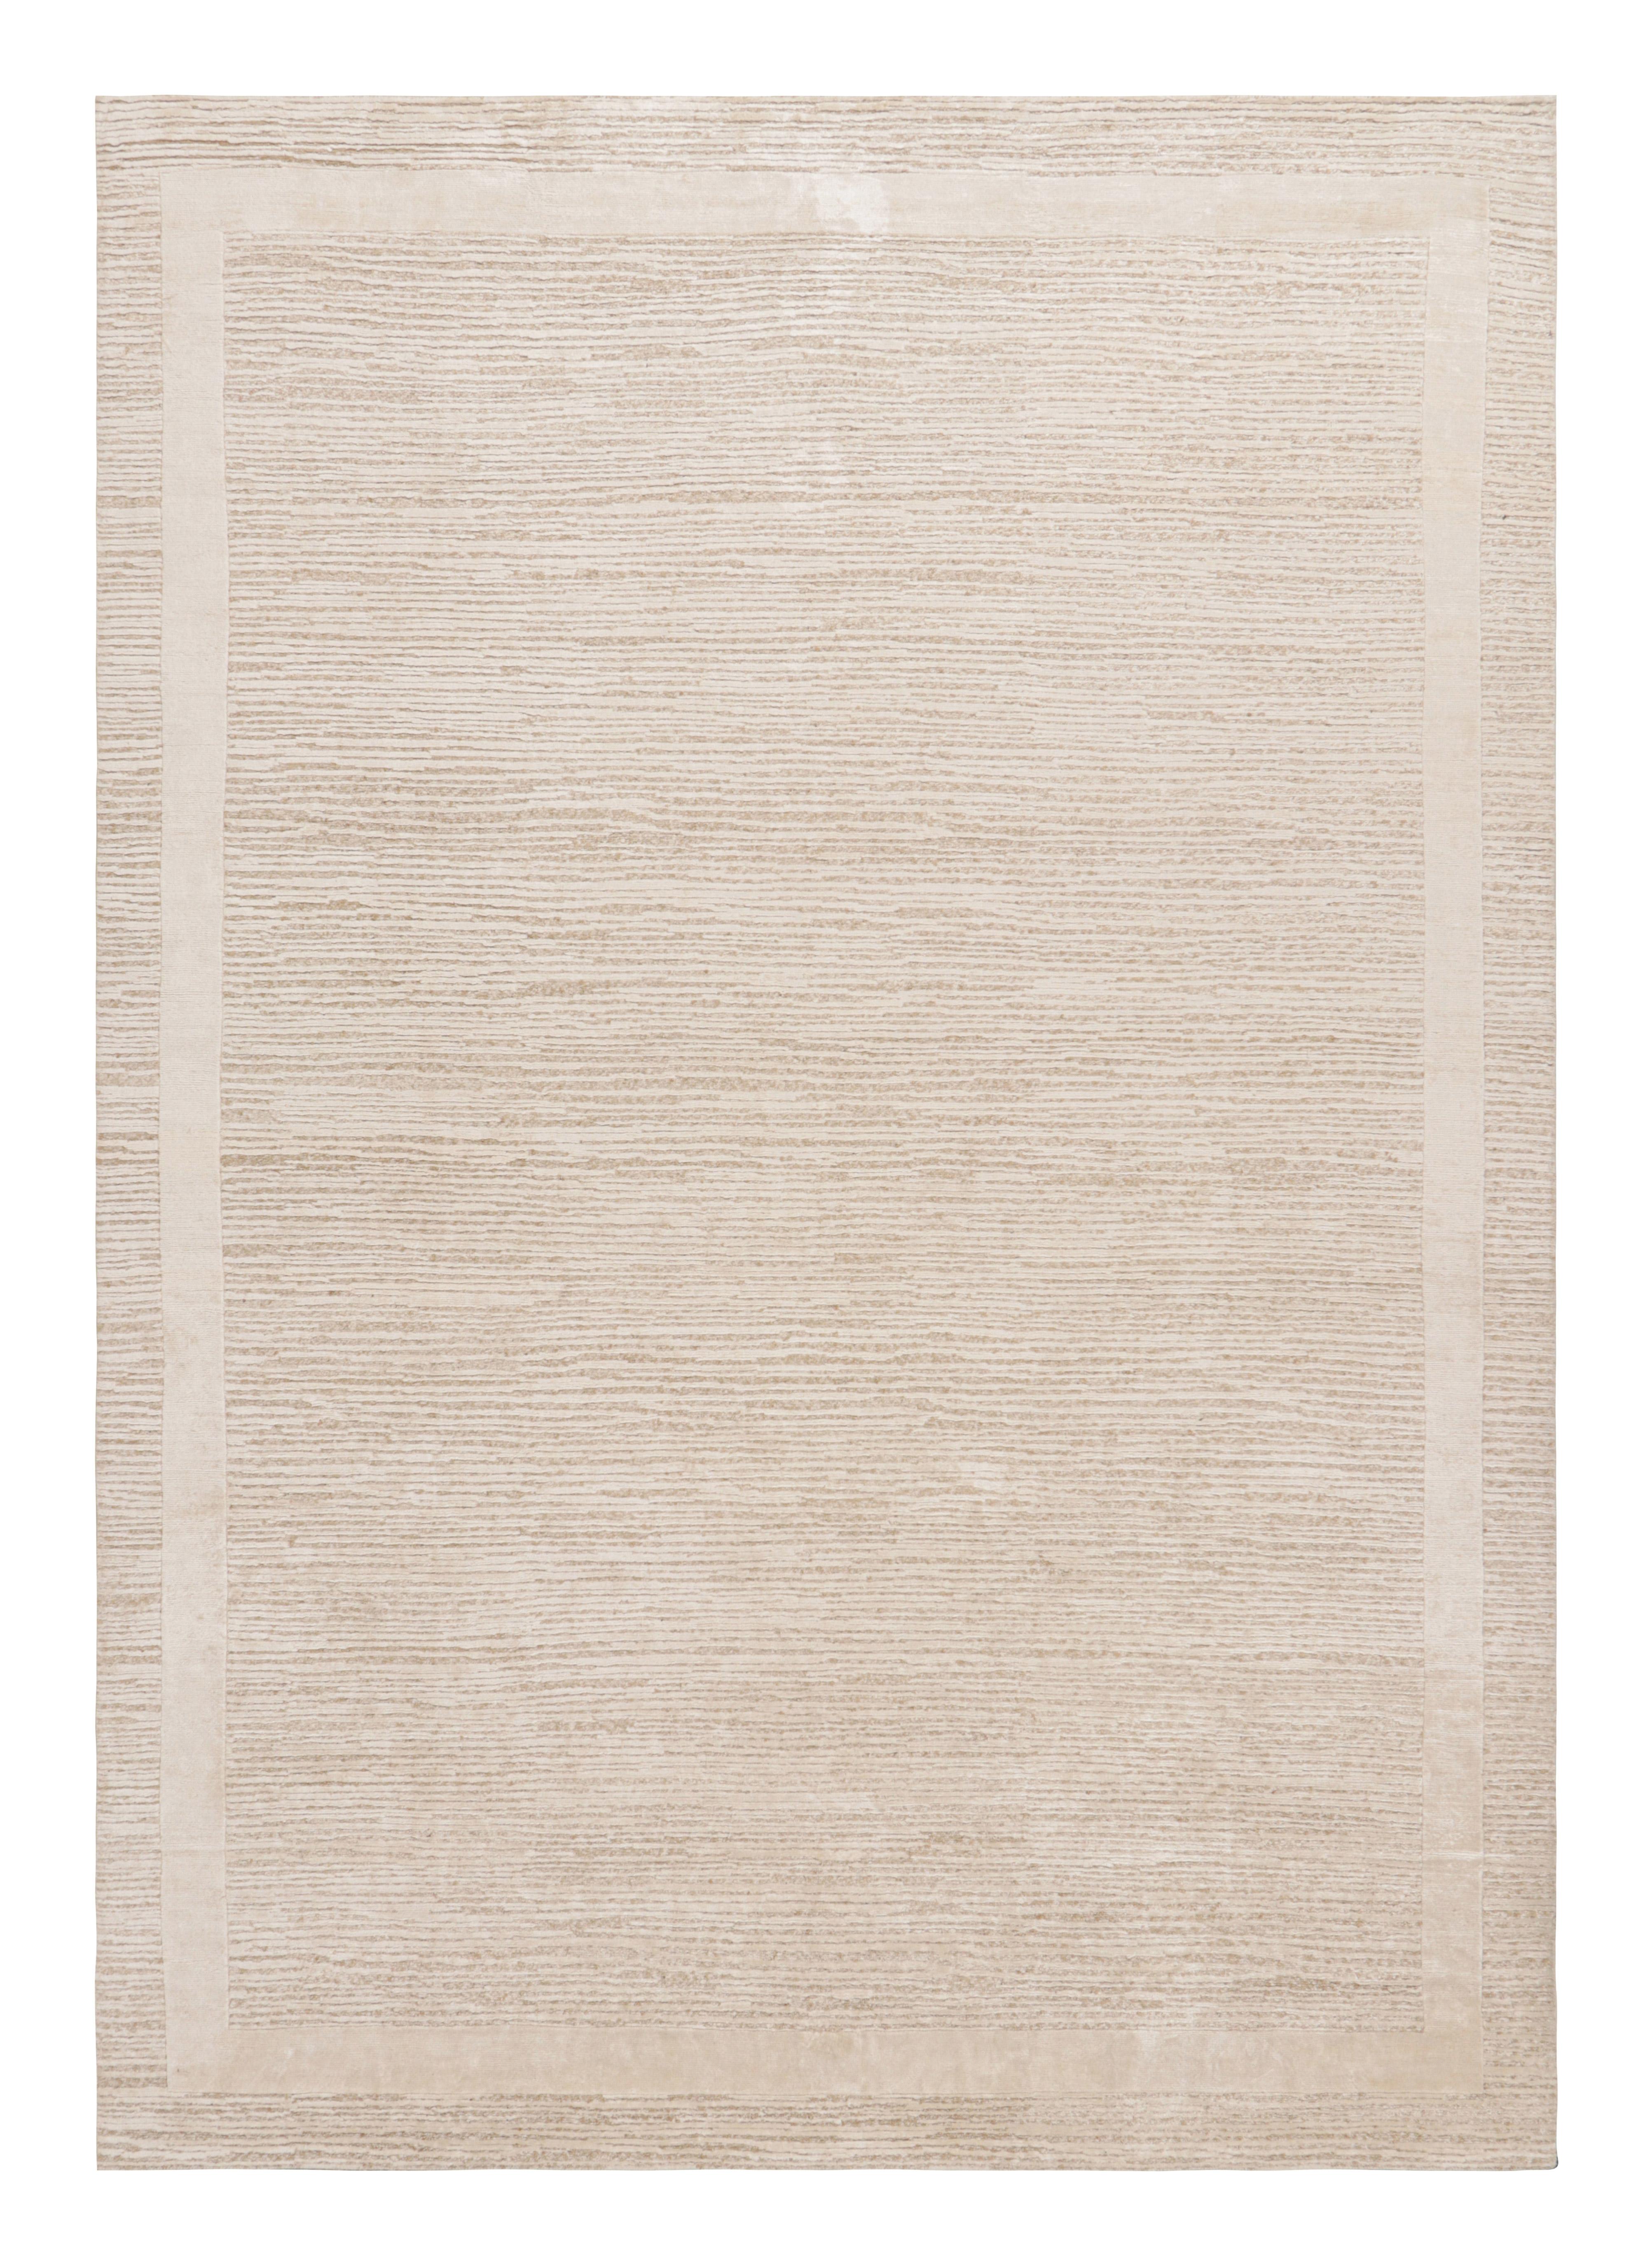 Silk Rug & Kilim’s Contemporary Textural Rug in Beige, Cream and White Tones For Sale